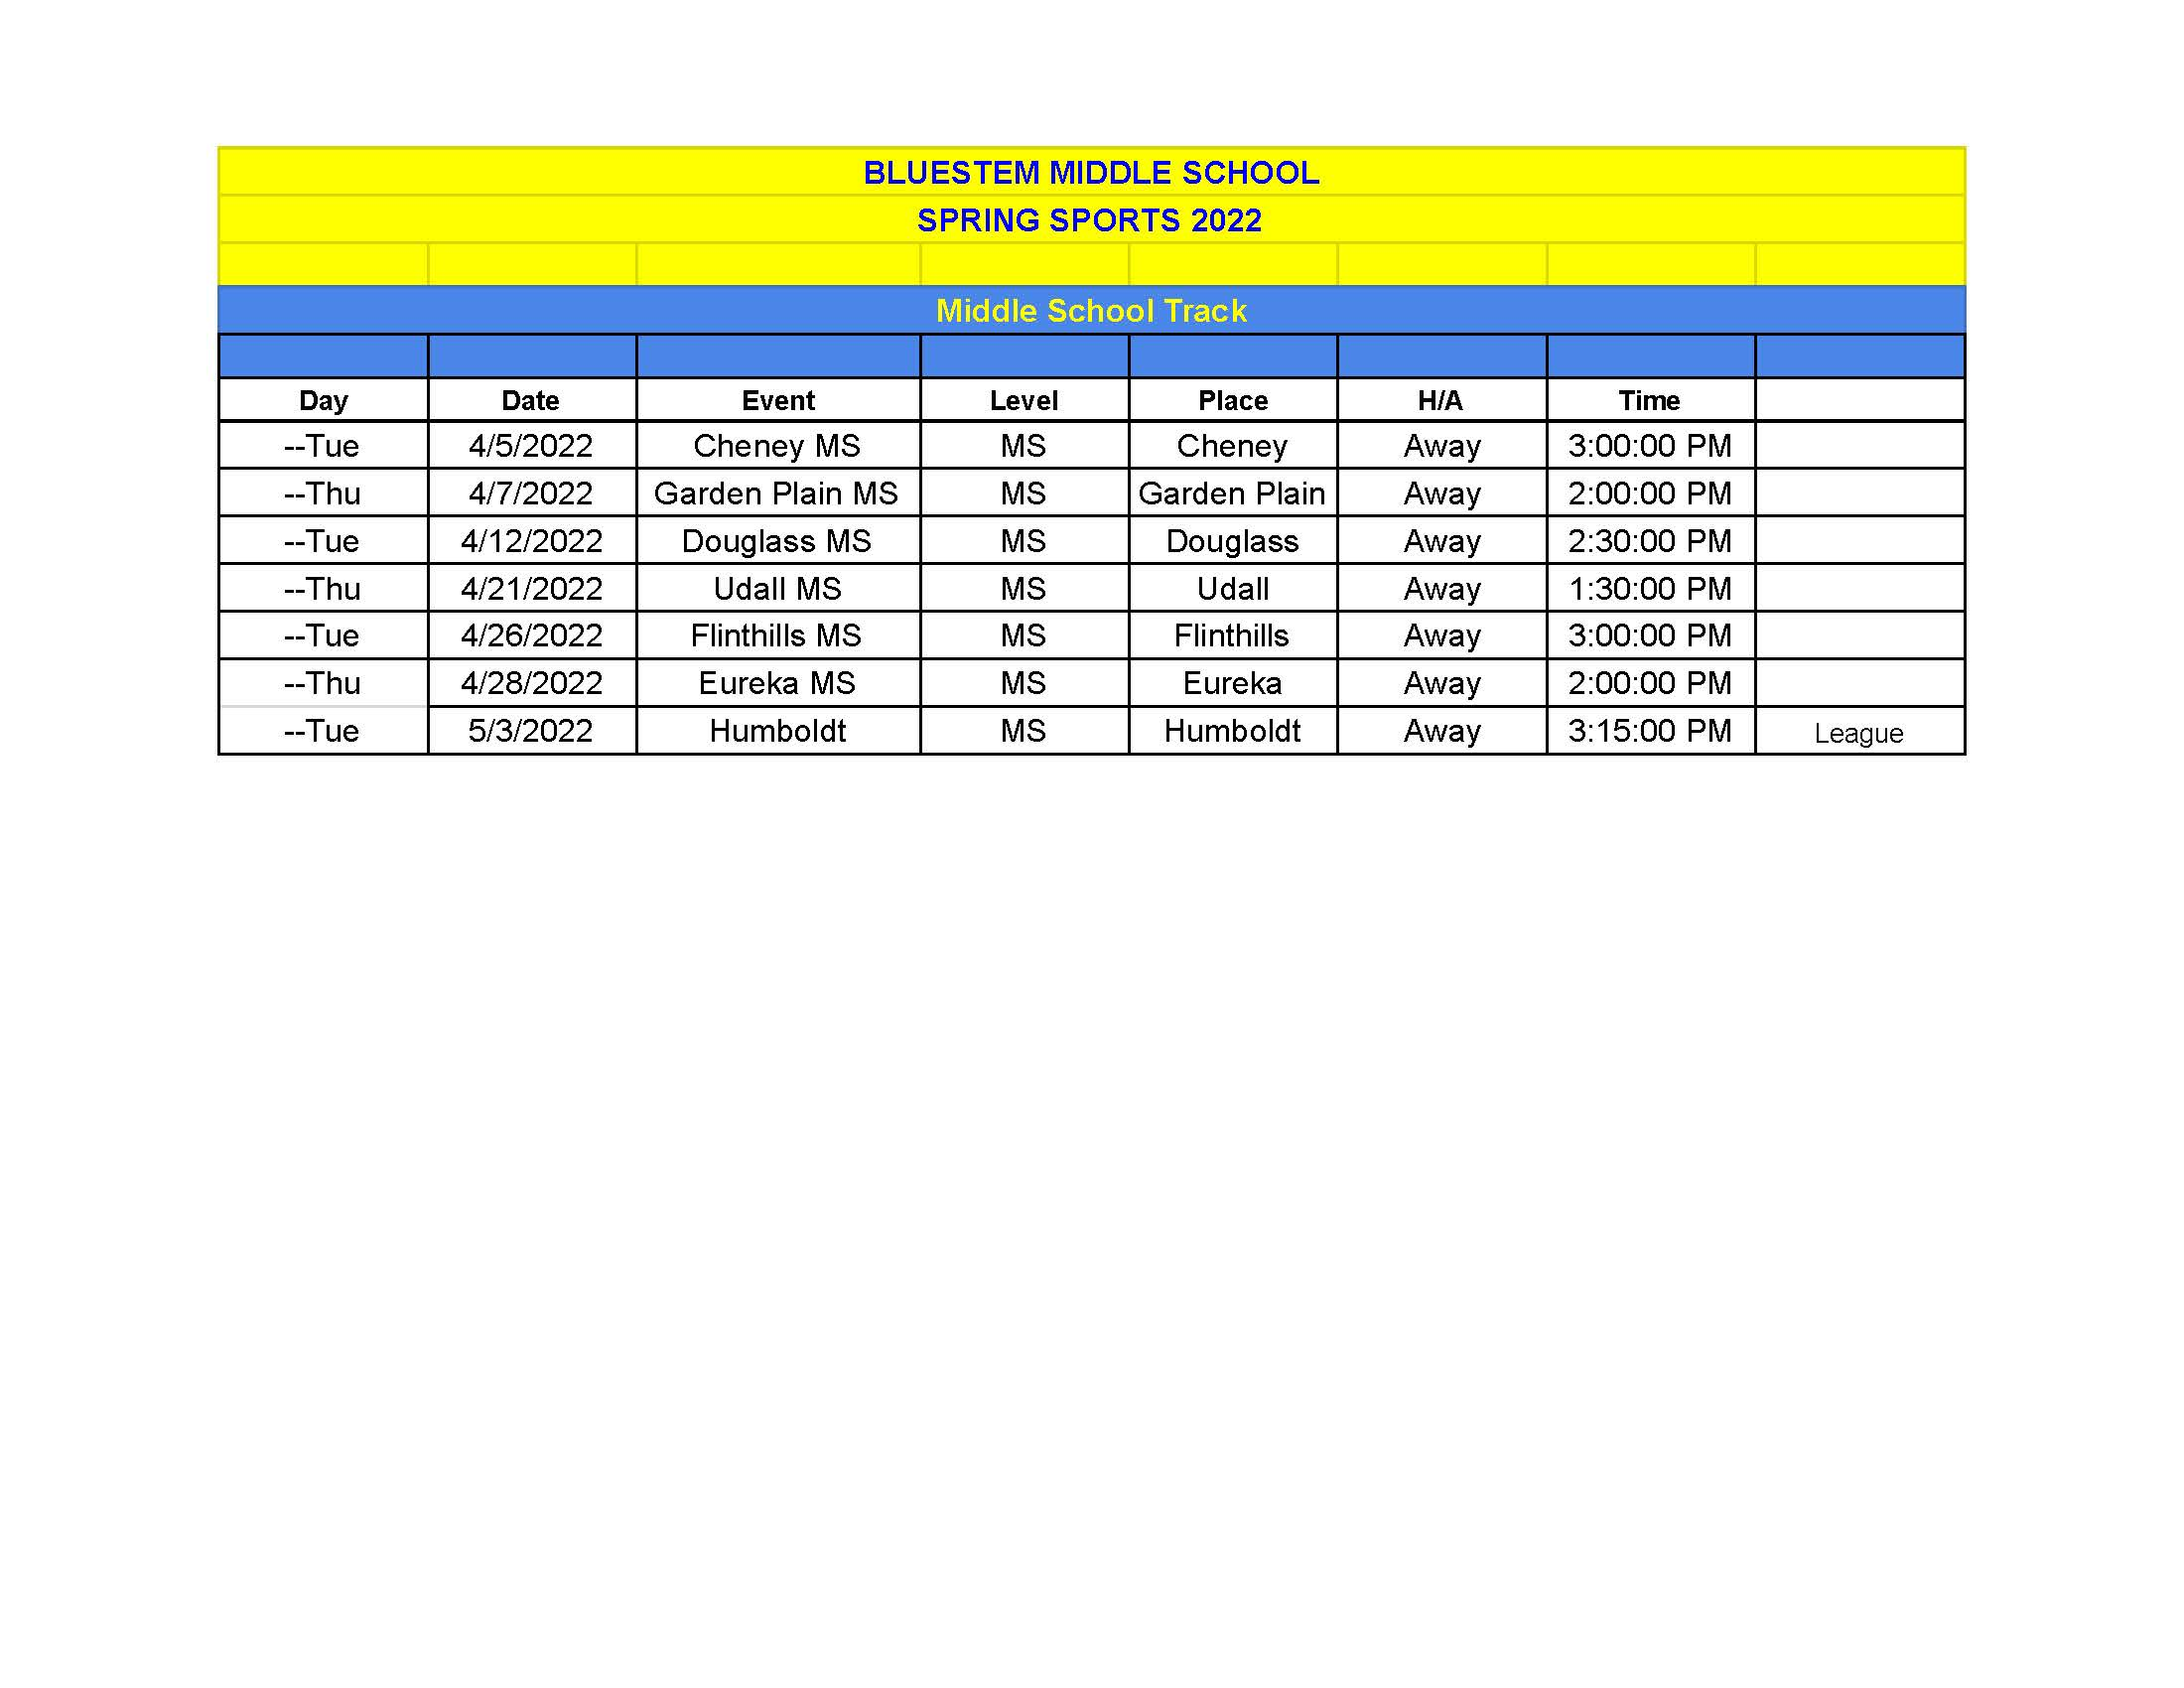 MIDDLE SCHOOL SPRING 2022 TRACK SCHEDULE